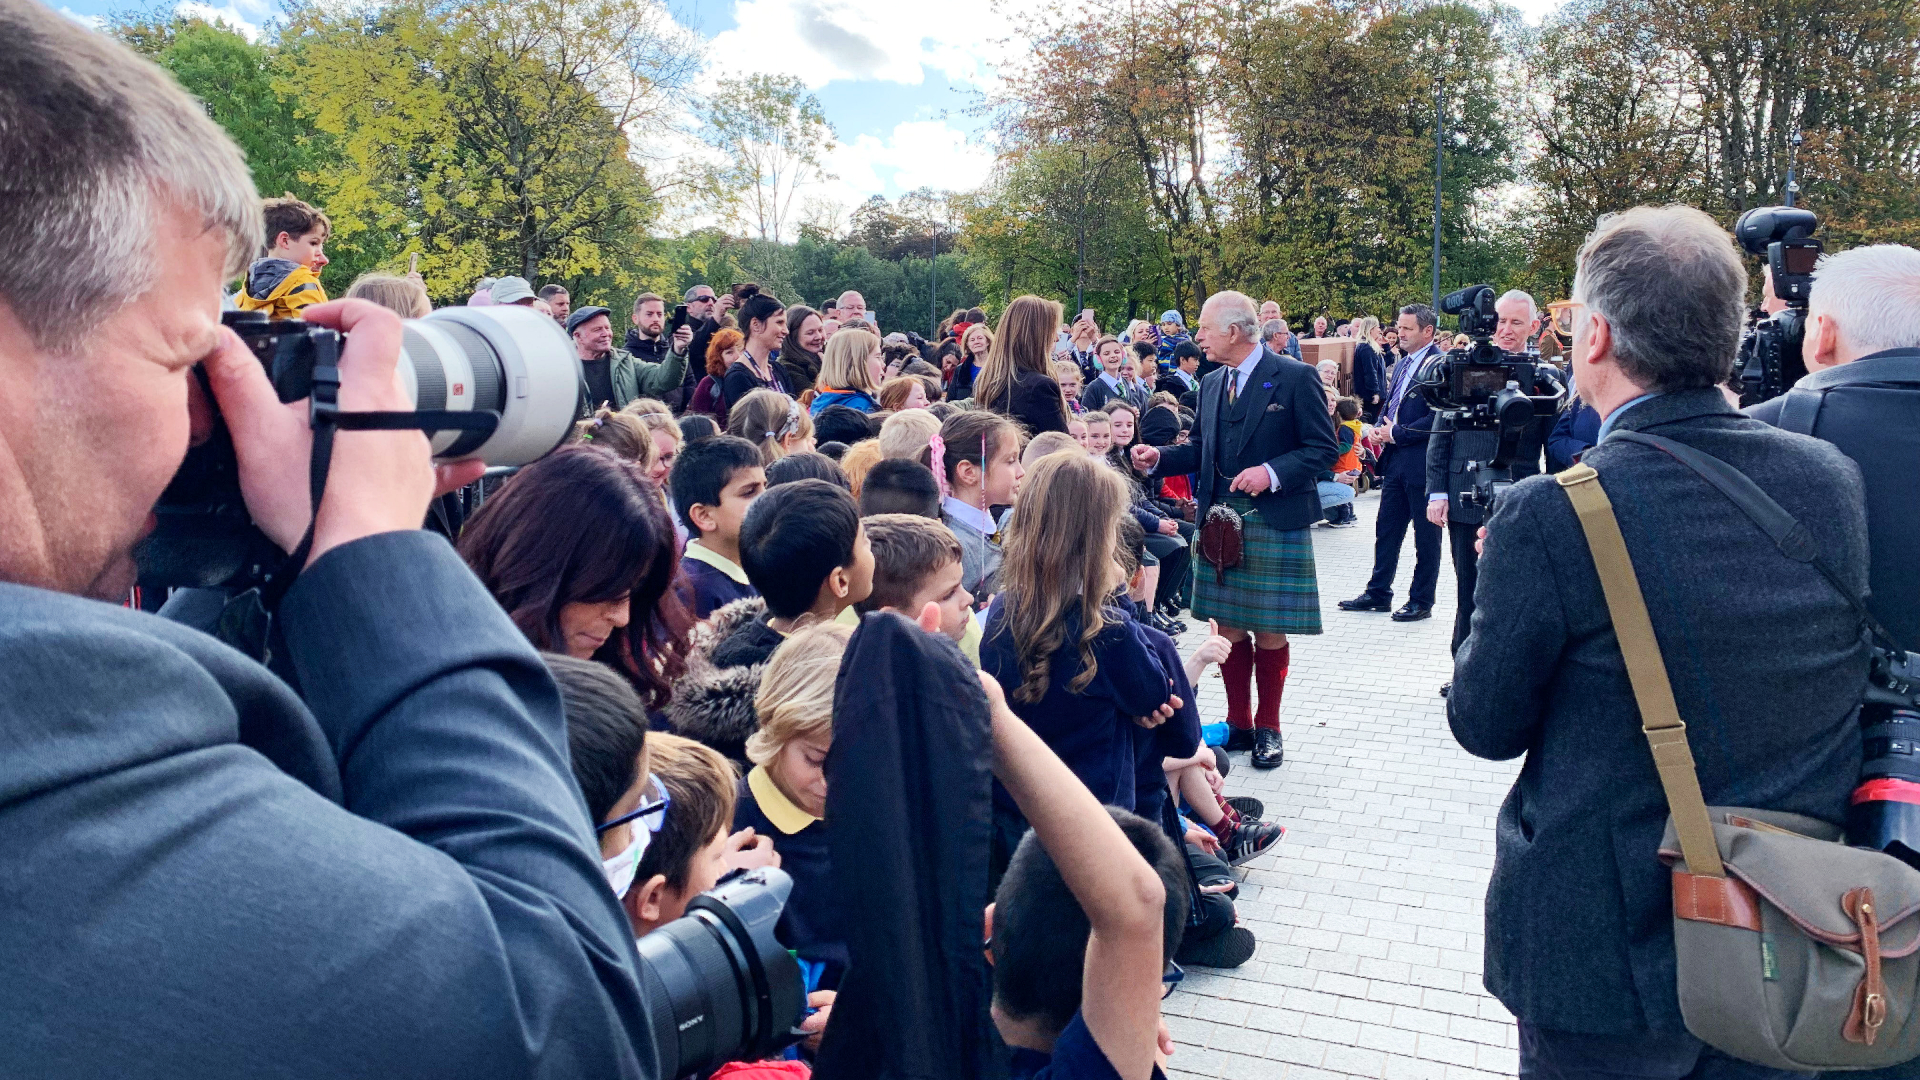 King Charles has officially reopened the Burrell Collection in Glasgow.